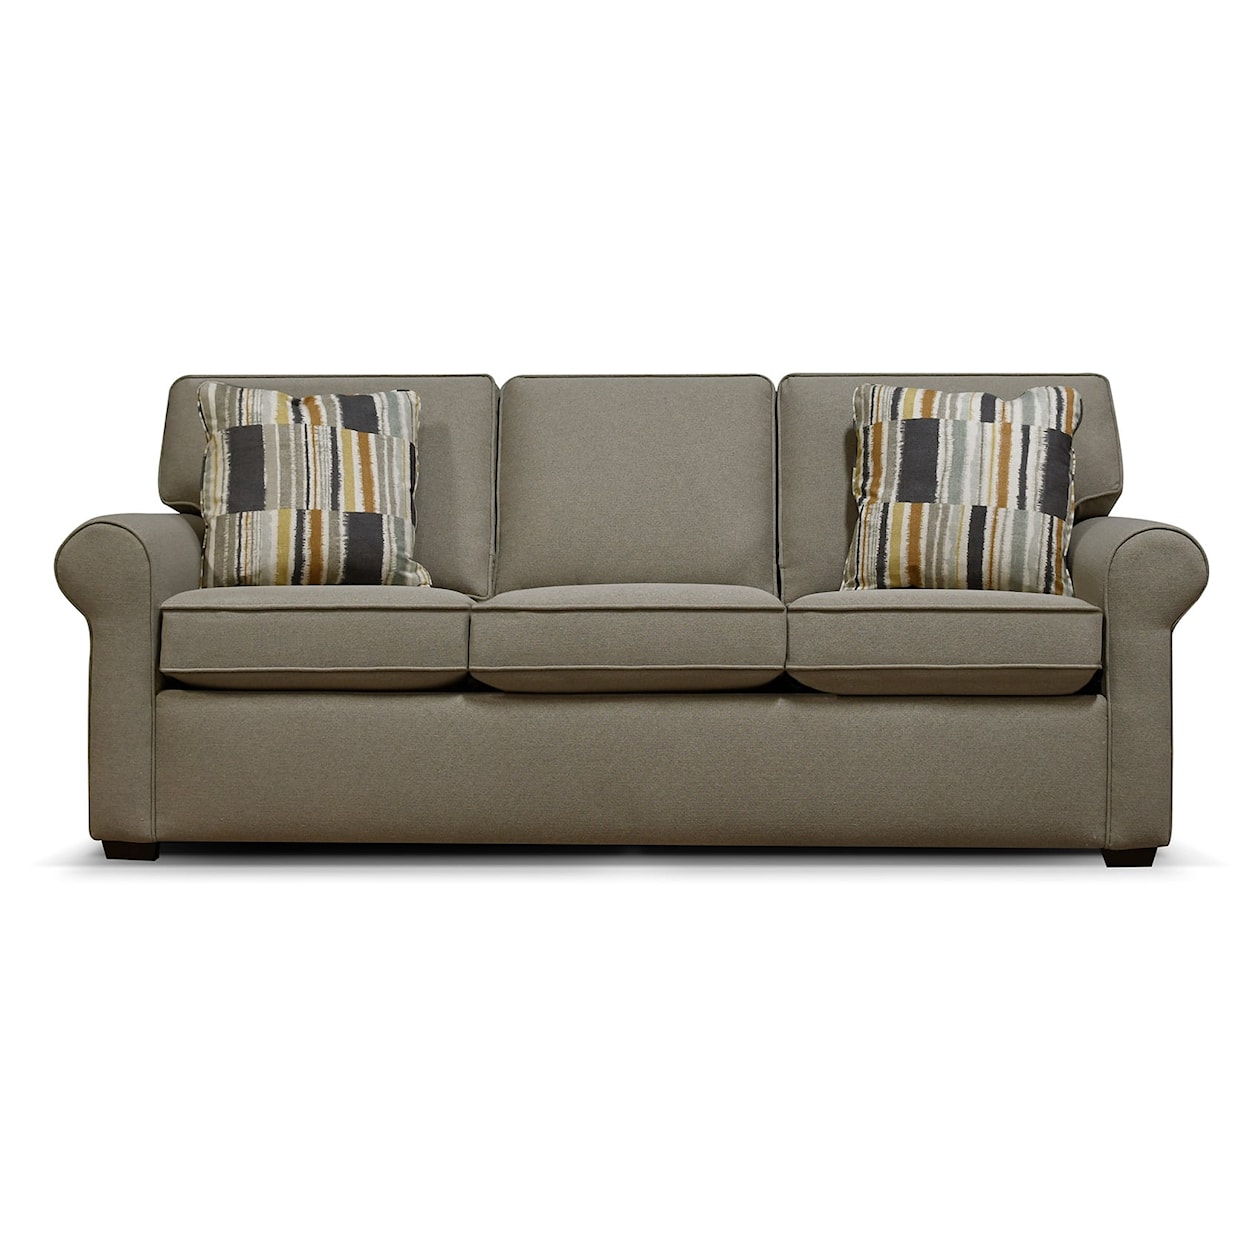 Tennessee Custom Upholstery 400 Series Sofa with Queen Pullout Bed